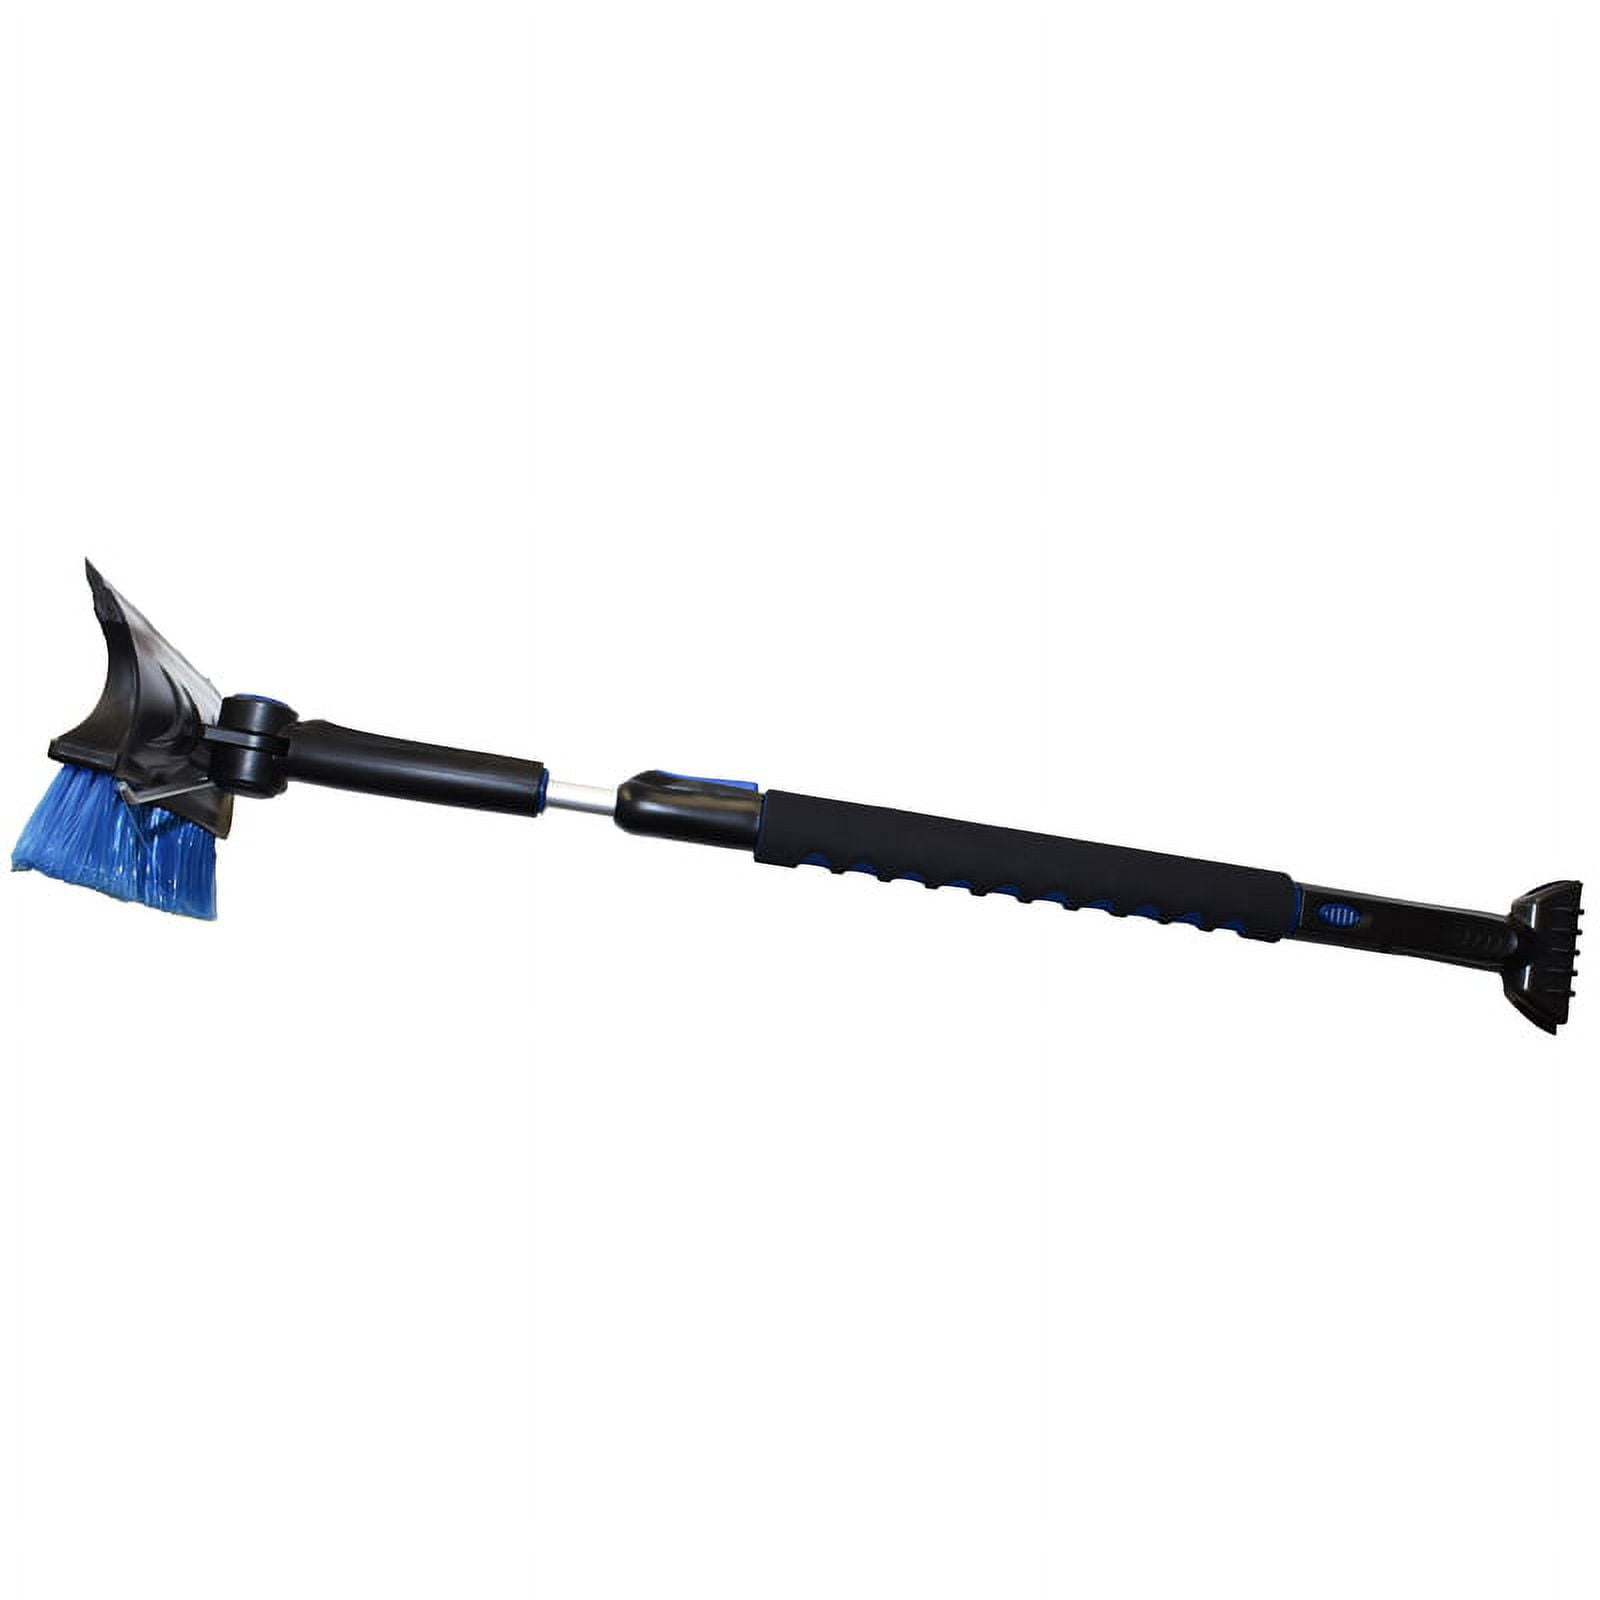 Picture of Rugg 8041094 45 in. Extendable Ice Scraper & Snowbrush